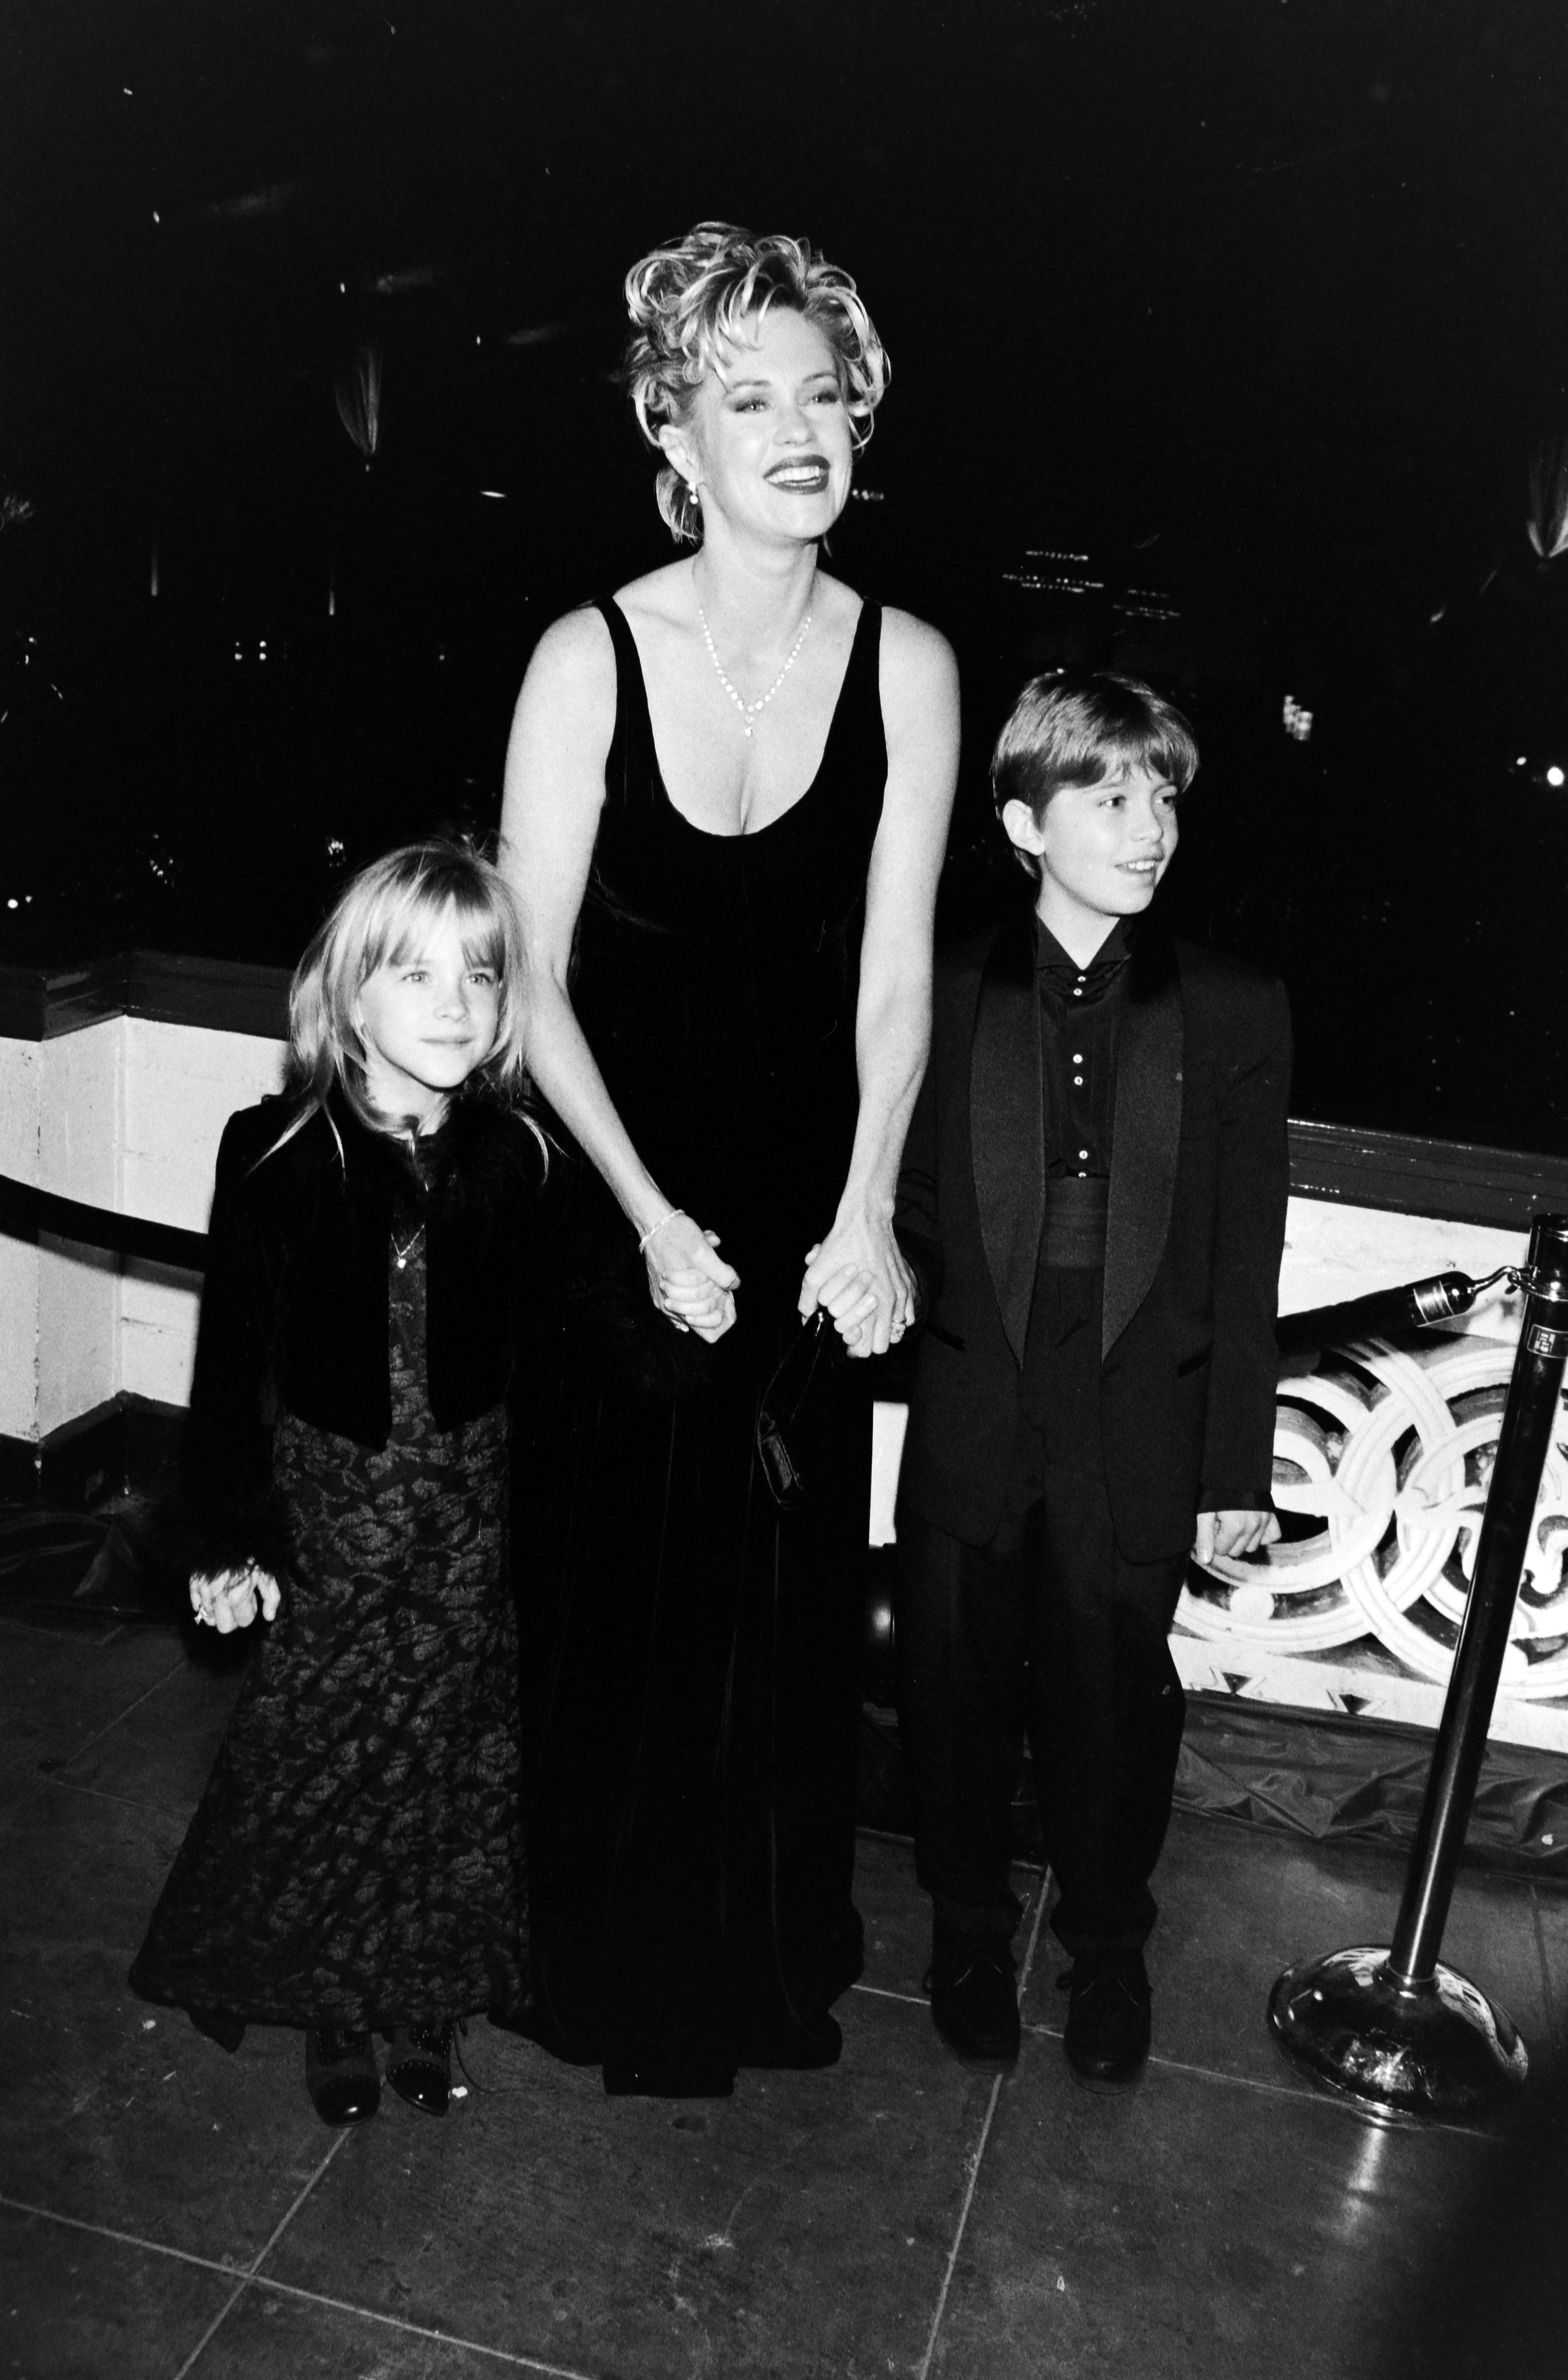 Melanie Griffith with her daughter Dakota Johnson and her son Alexander Bauer at the premiere of "Evita" on December 14, 1996, in Los Angeles, California. | Source: Getty Images